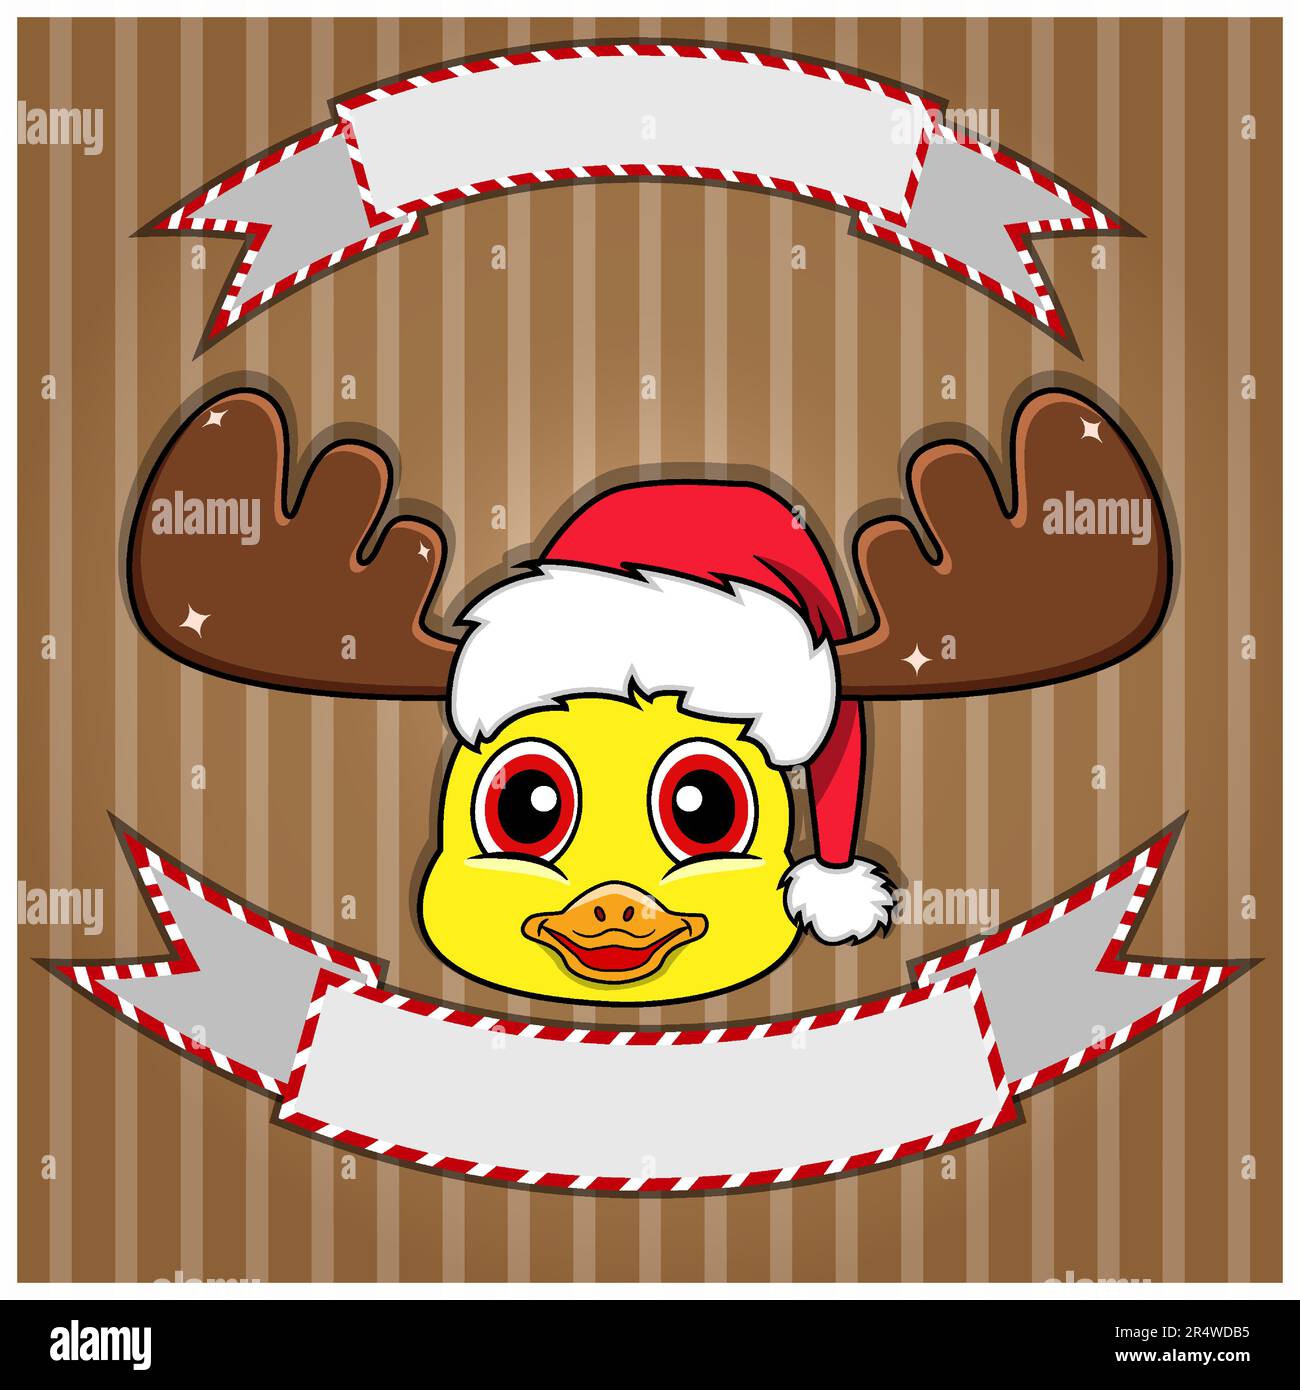 https://c8.alamy.com/comp/2R4WDB5/cute-duck-head-with-christmas-hat-blank-label-and-banner-character-mascot-and-icon-vector-and-illustration-2R4WDB5.jpg